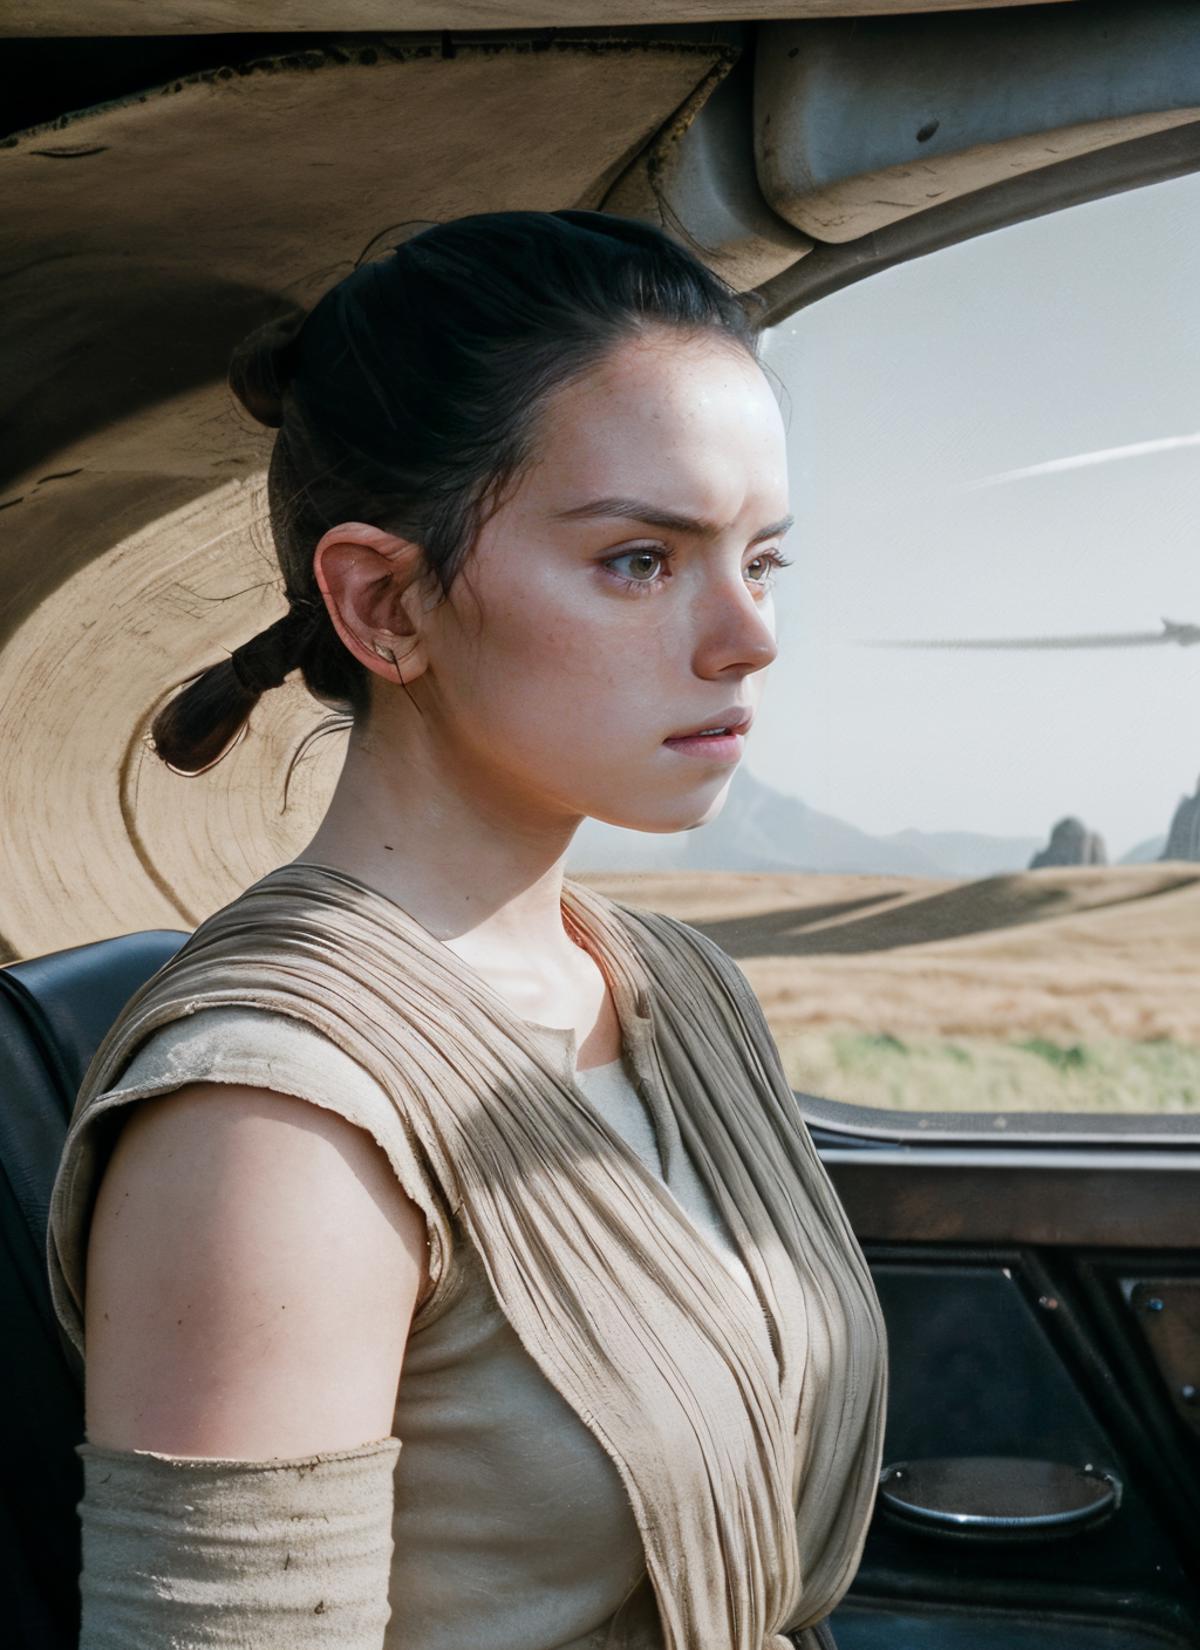 Rey from Star Wars (Daisy Ridley) image by wensleyp01